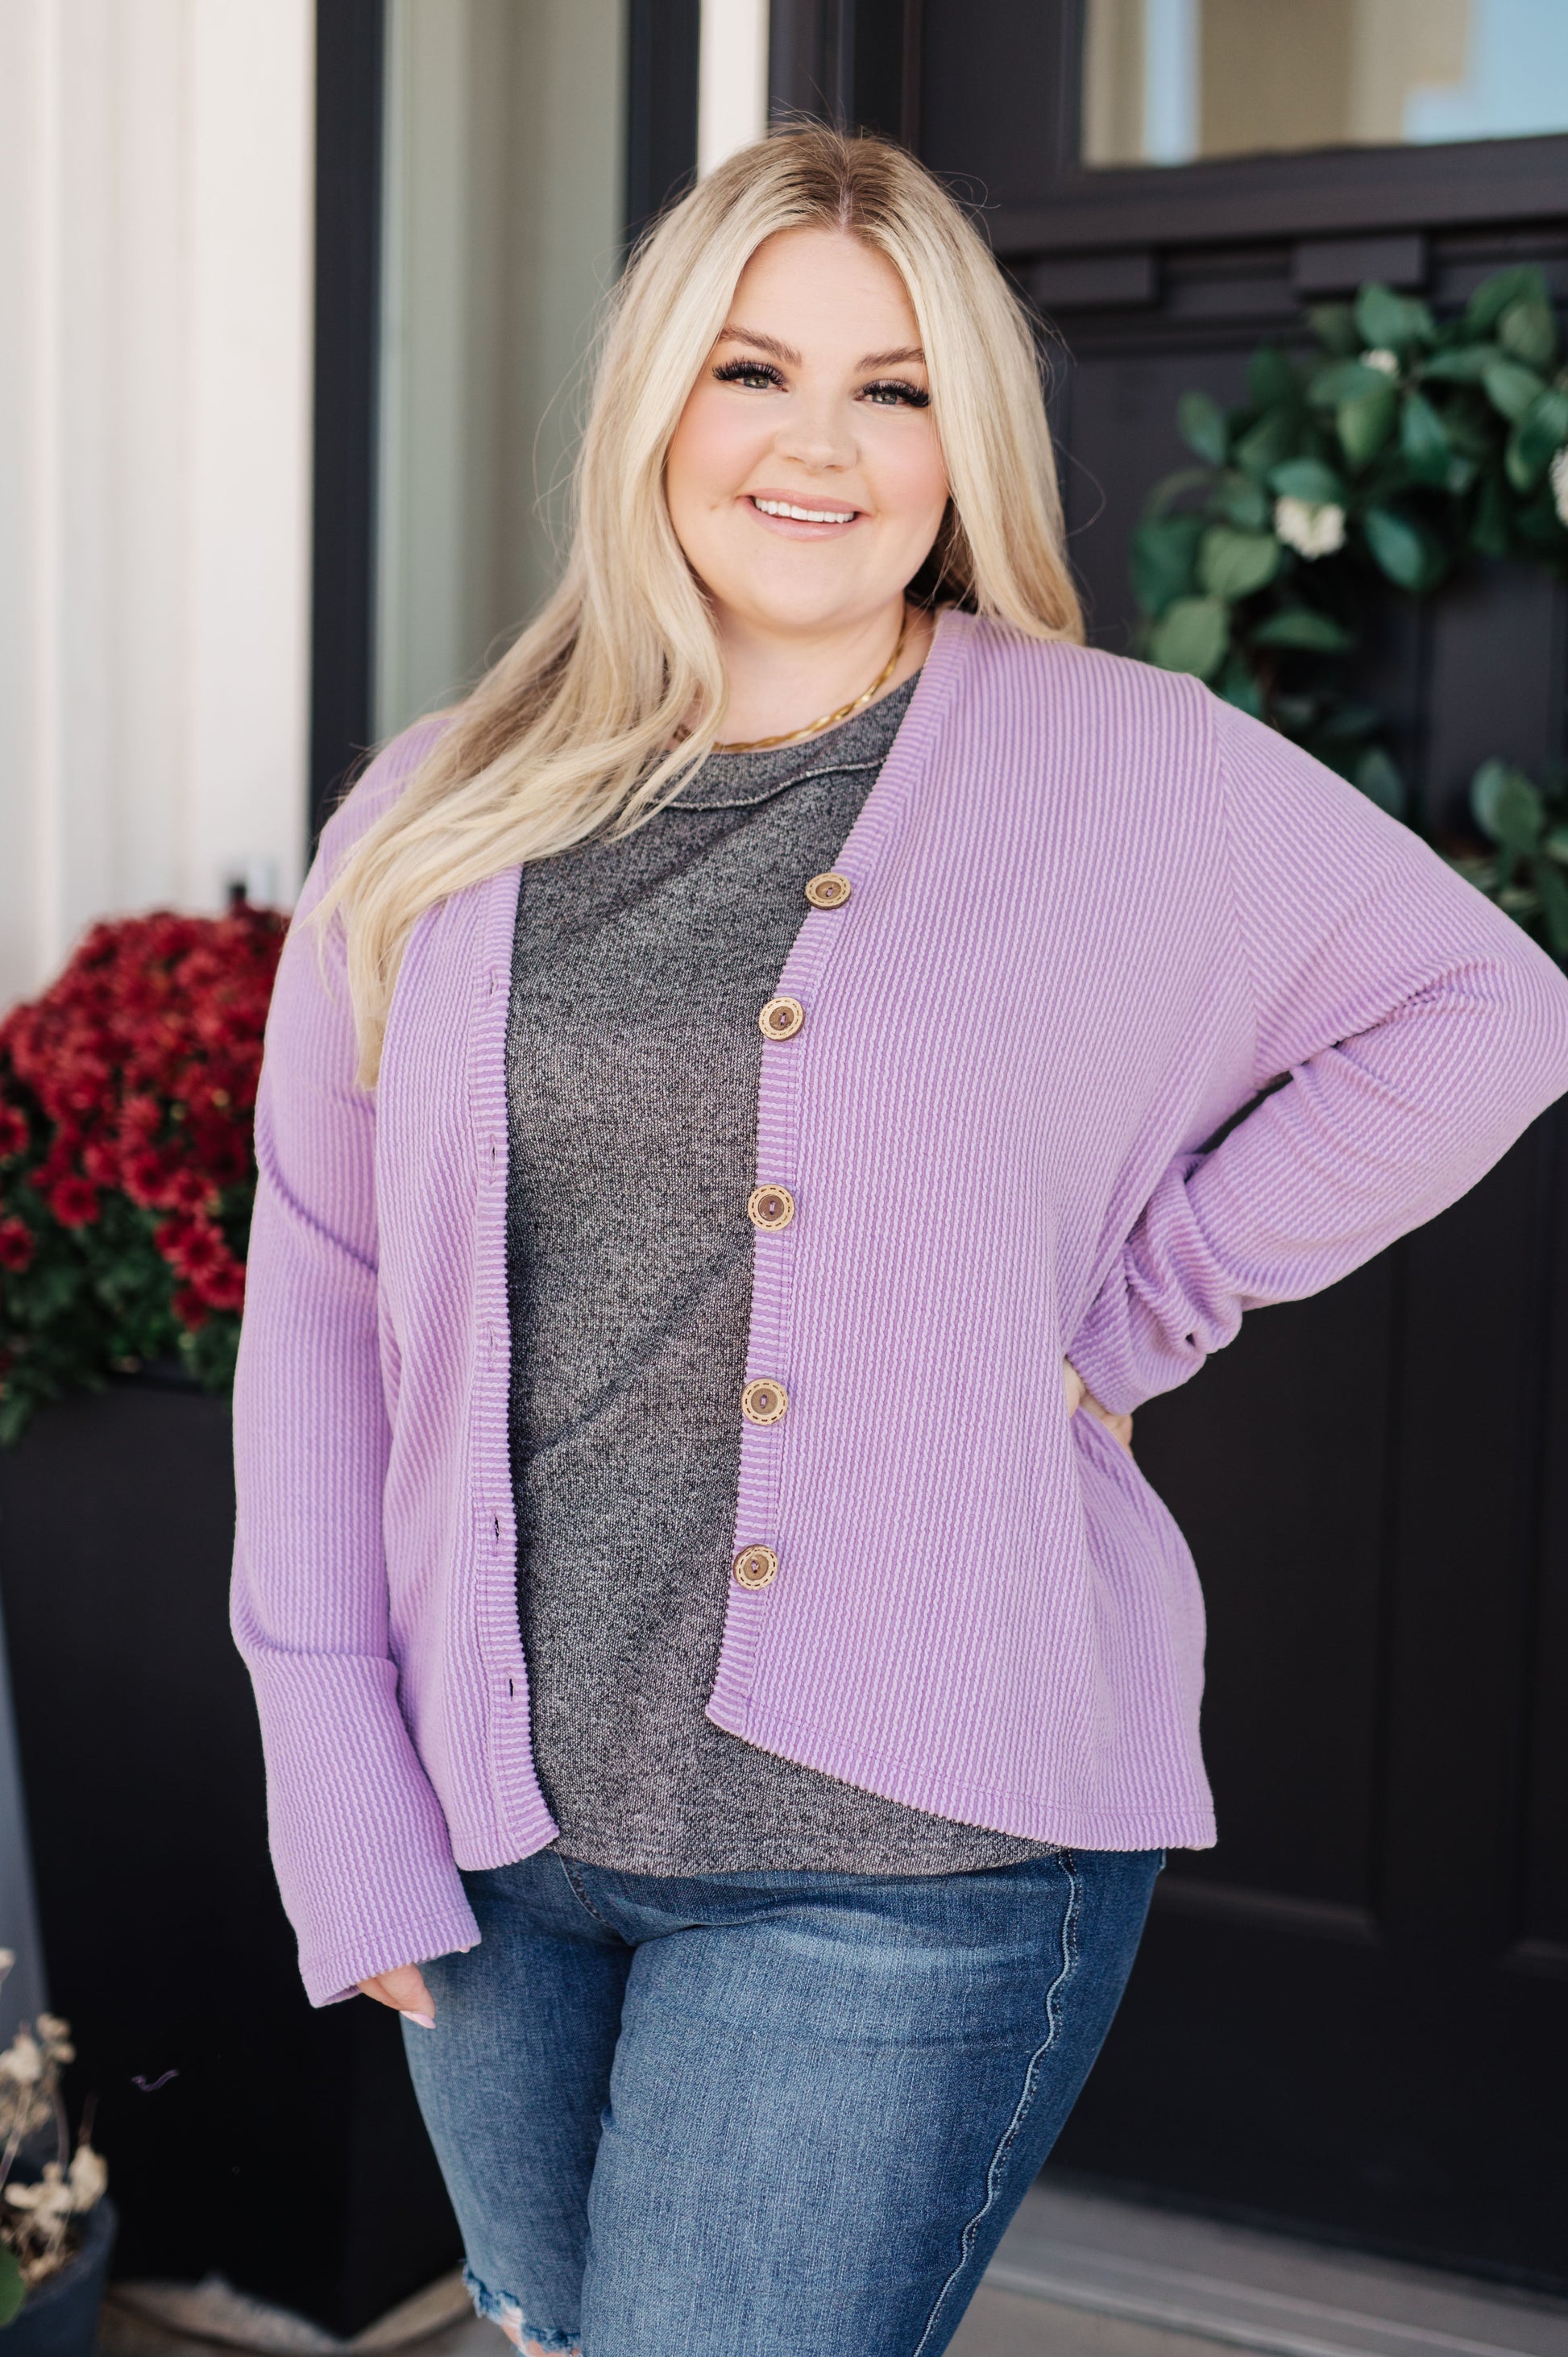 Look your best in the Dilly Dally Ribbed Cardigan. Featuring a chic v-neckline and textured rib knit design, this cardigan is comfortable yet stylish. Button front closure makes it easy to put on and take off, with a flattering easy fit. Feel confident and look great with the Dilly Dally Cardigan! S - 3X